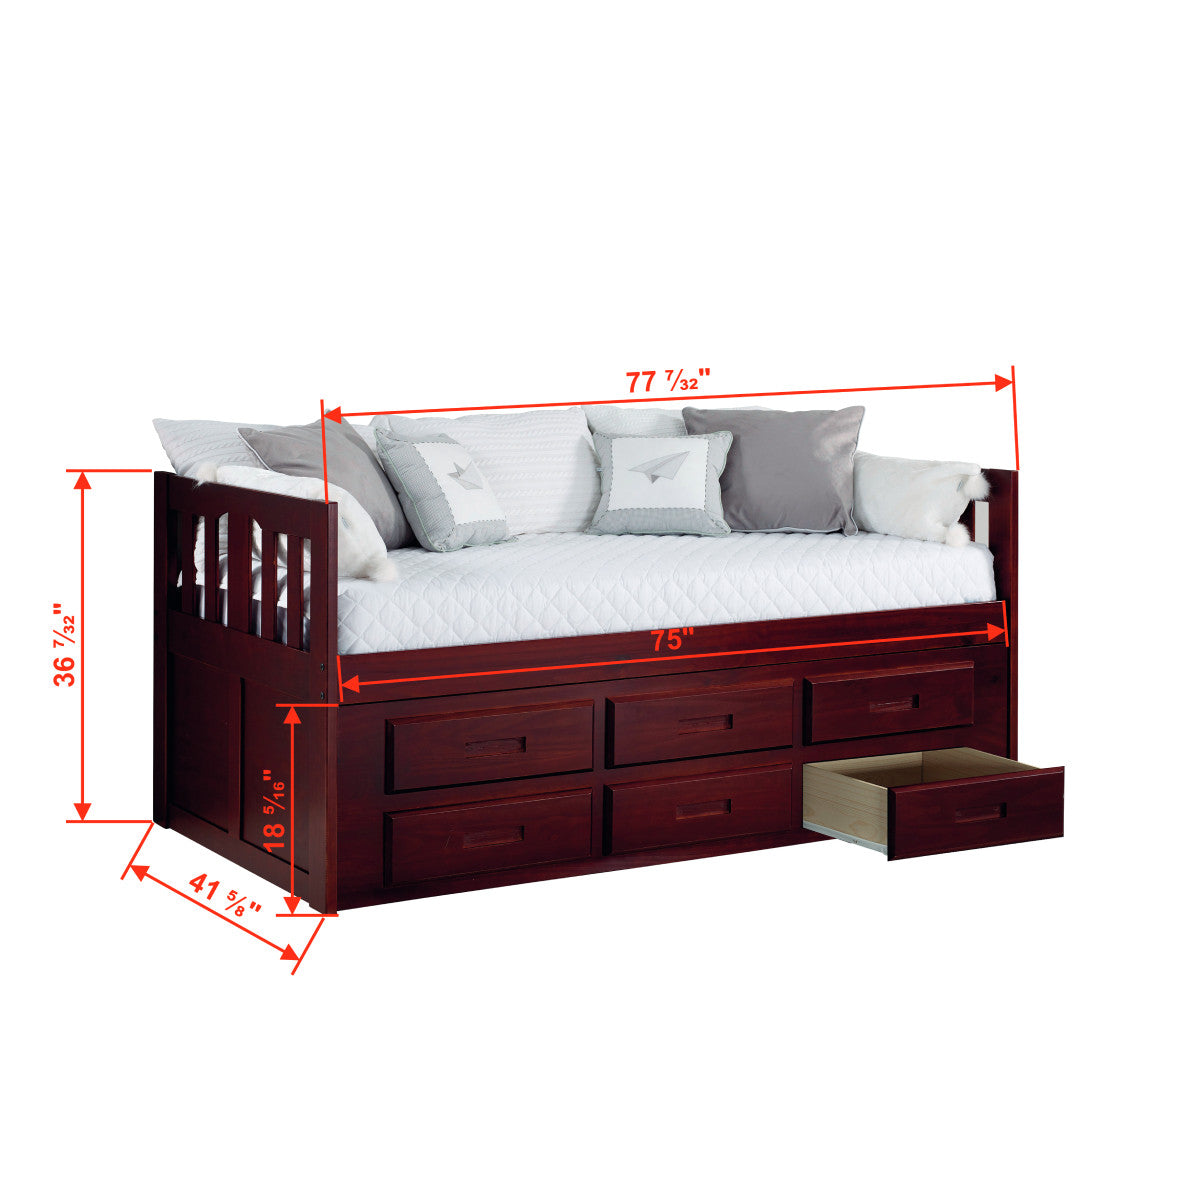 TWIN MISSION CAPTAINS BED WITH 6 DRAWER UNDER BED STORAGE IN MERLOT FINISH